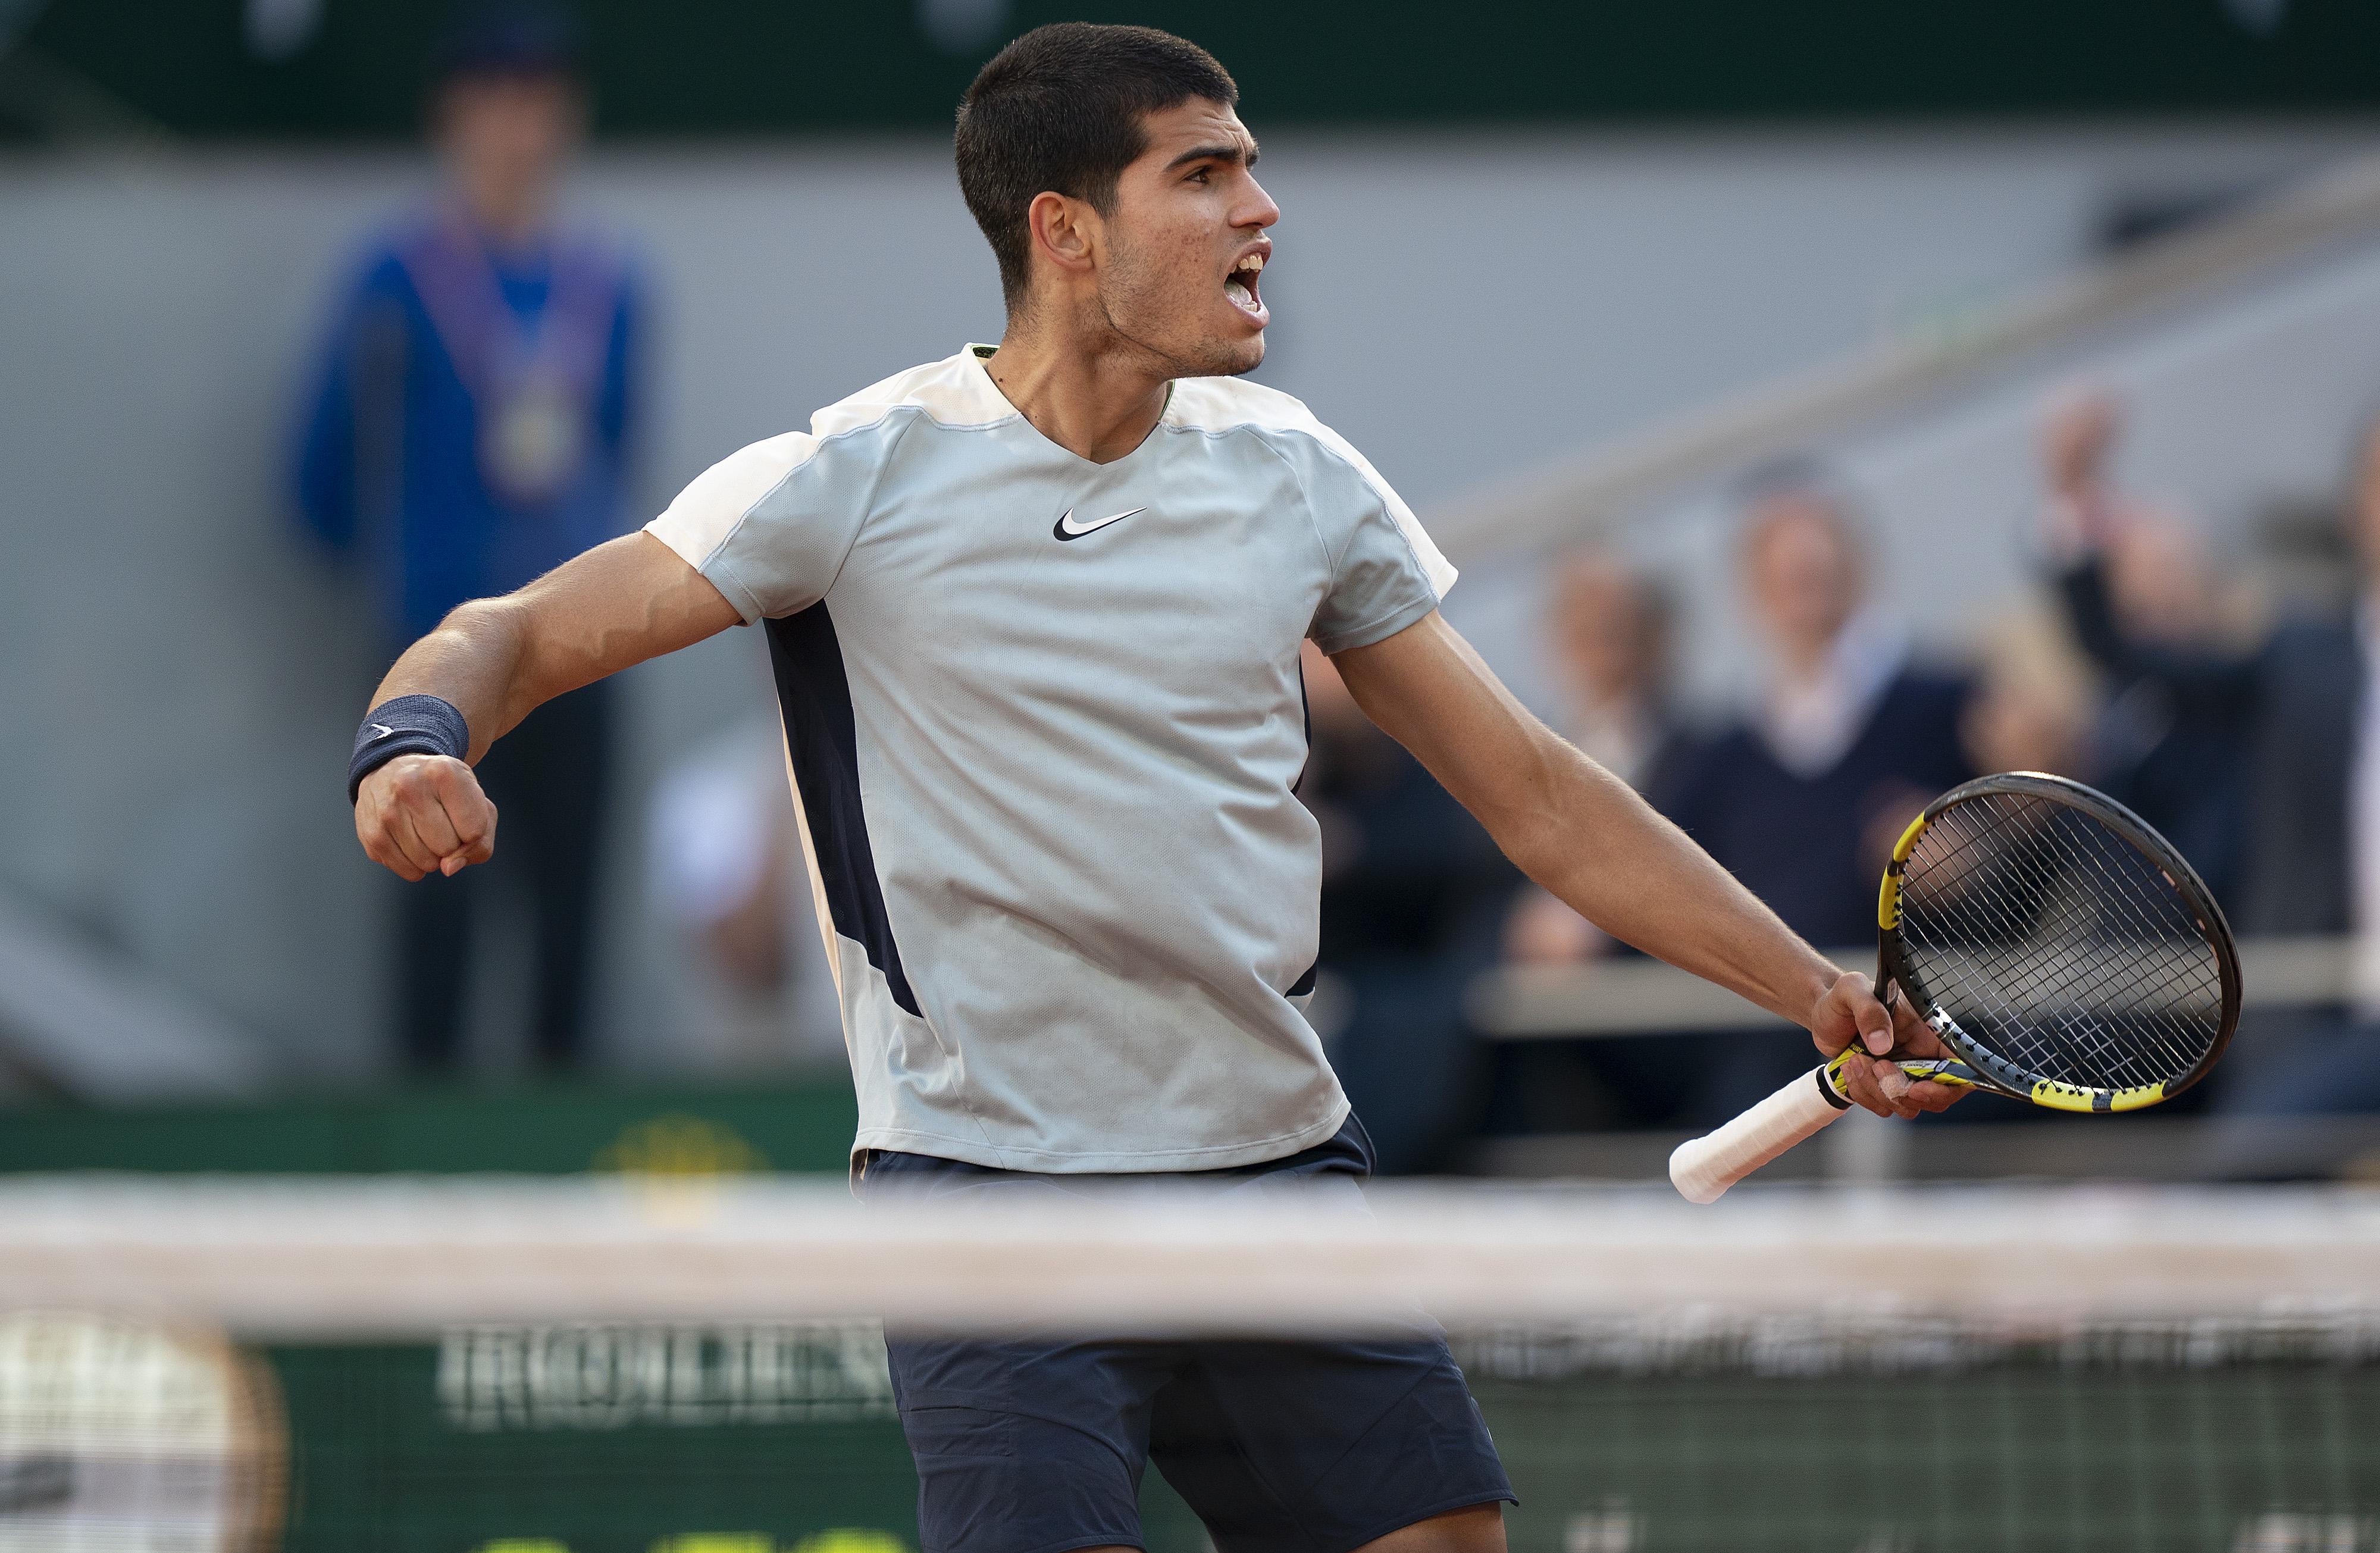 Oscar Otte vs Carlos Alcaraz Odds, Prediction and Betting Trends for 2022 Wimbledon Men's Round 3 Match